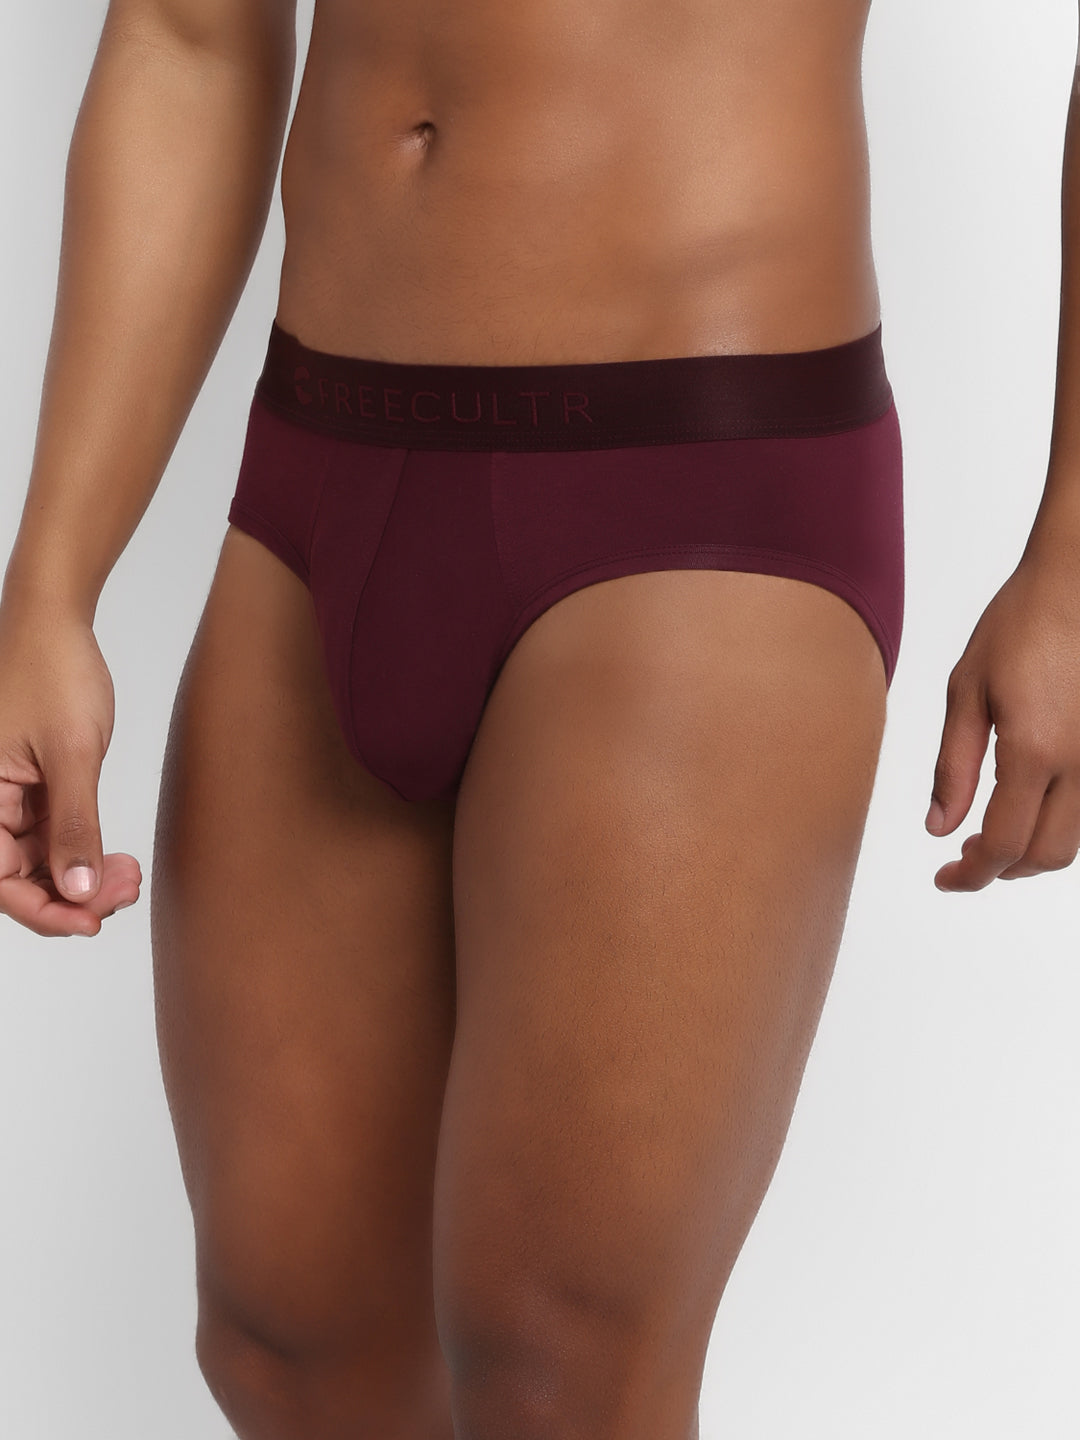 Men's Micro Modal & Elastane Brief in Solid Waistband (Pack of 3) - freecultr.com